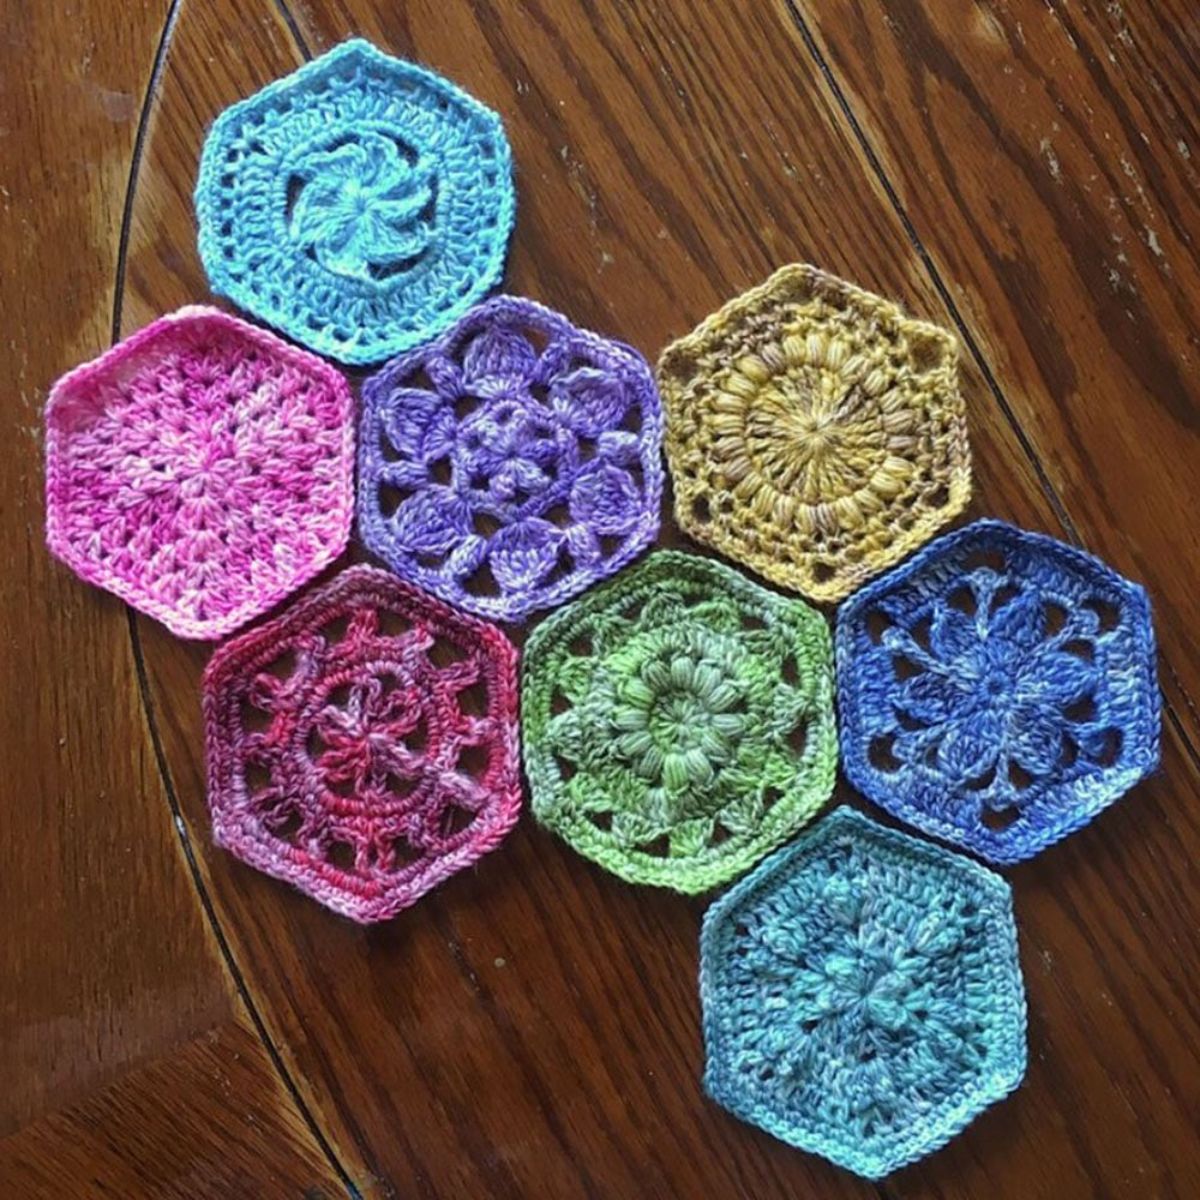 Brightly colored hexagon crochet squares with small flowers stitched into them used for baby’s blankets on a dark wooden background. 